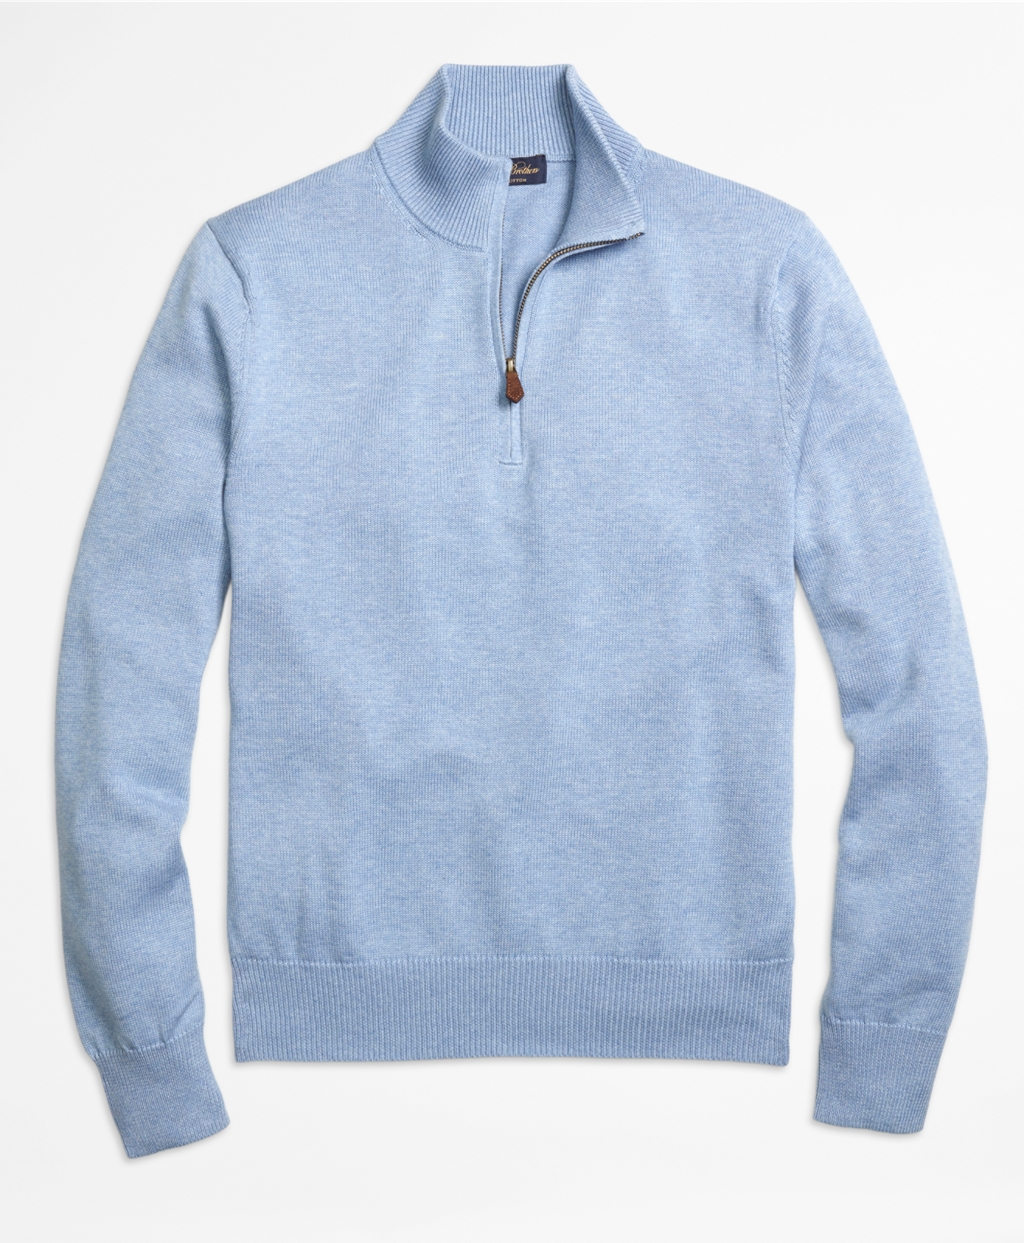 Lyst - Brooks Brothers Supima® Cotton Half-zip Sweater in Blue for Men